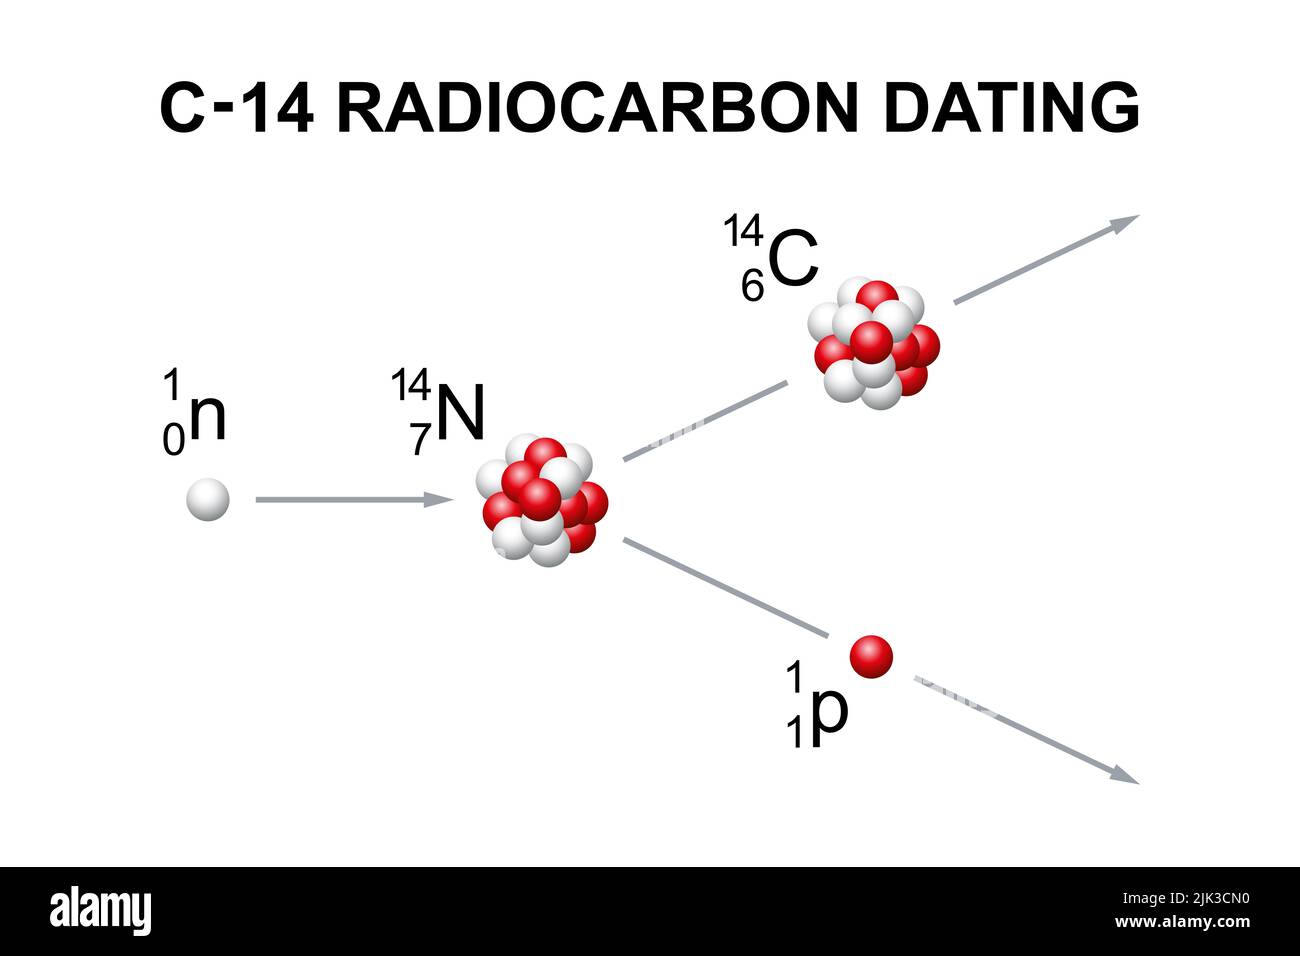 Radiocarbon dating, known as carbon or C-14 dating. A method of determining the age of an object containing organic material. Stock Photo